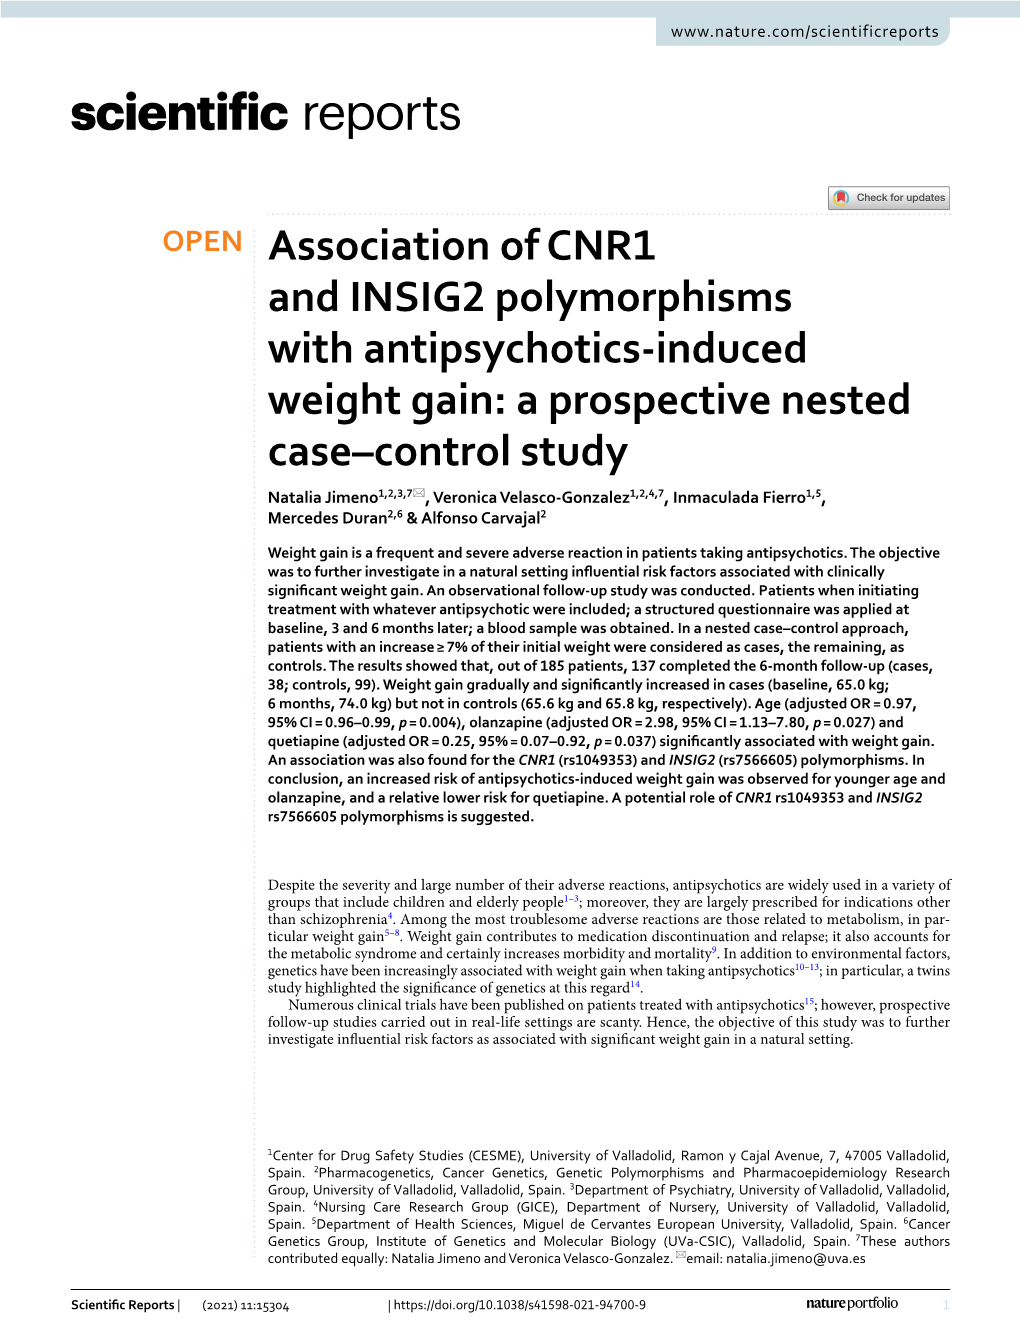 Association of CNR1 and INSIG2 Polymorphisms with Antipsychotics